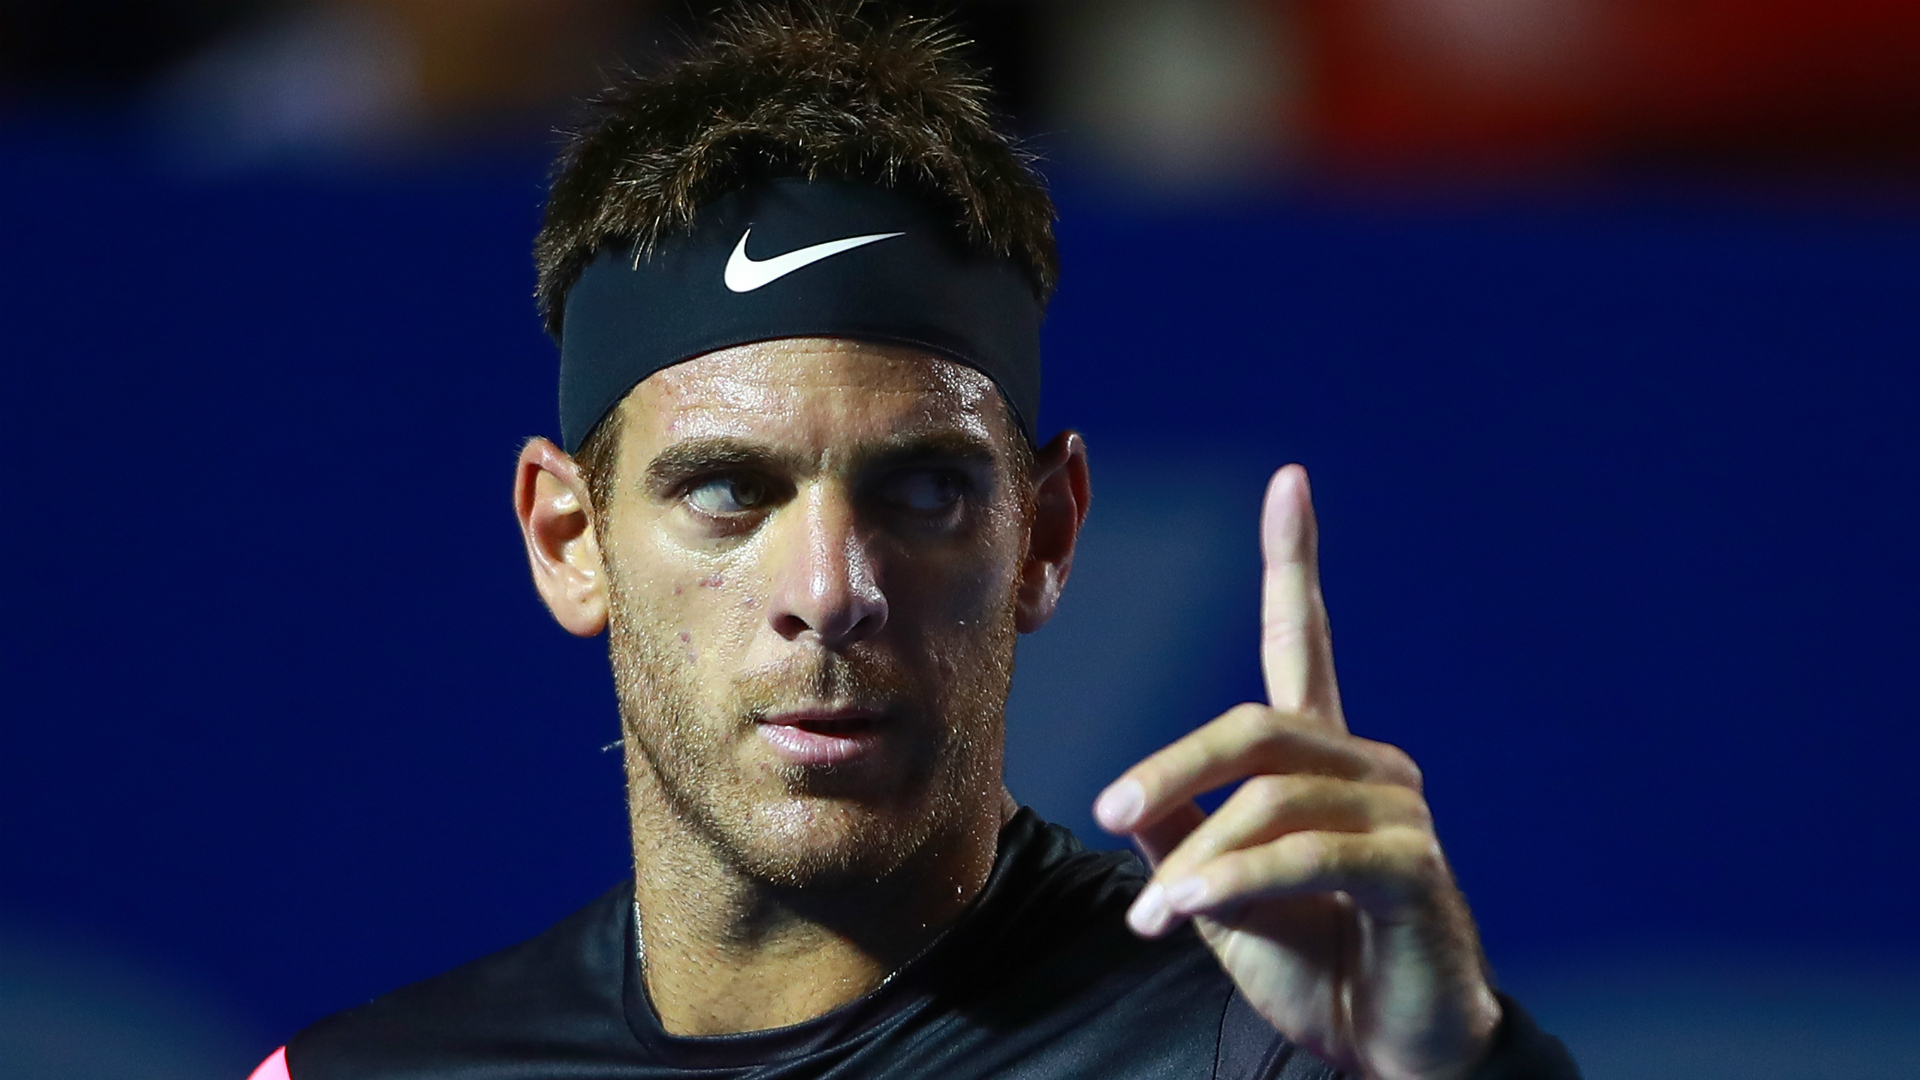 Juan Martin del Potro and Kevin Anderson will contest Saturday's Acapulco final following wins against Alexander Zverev and Jared Donaldson.